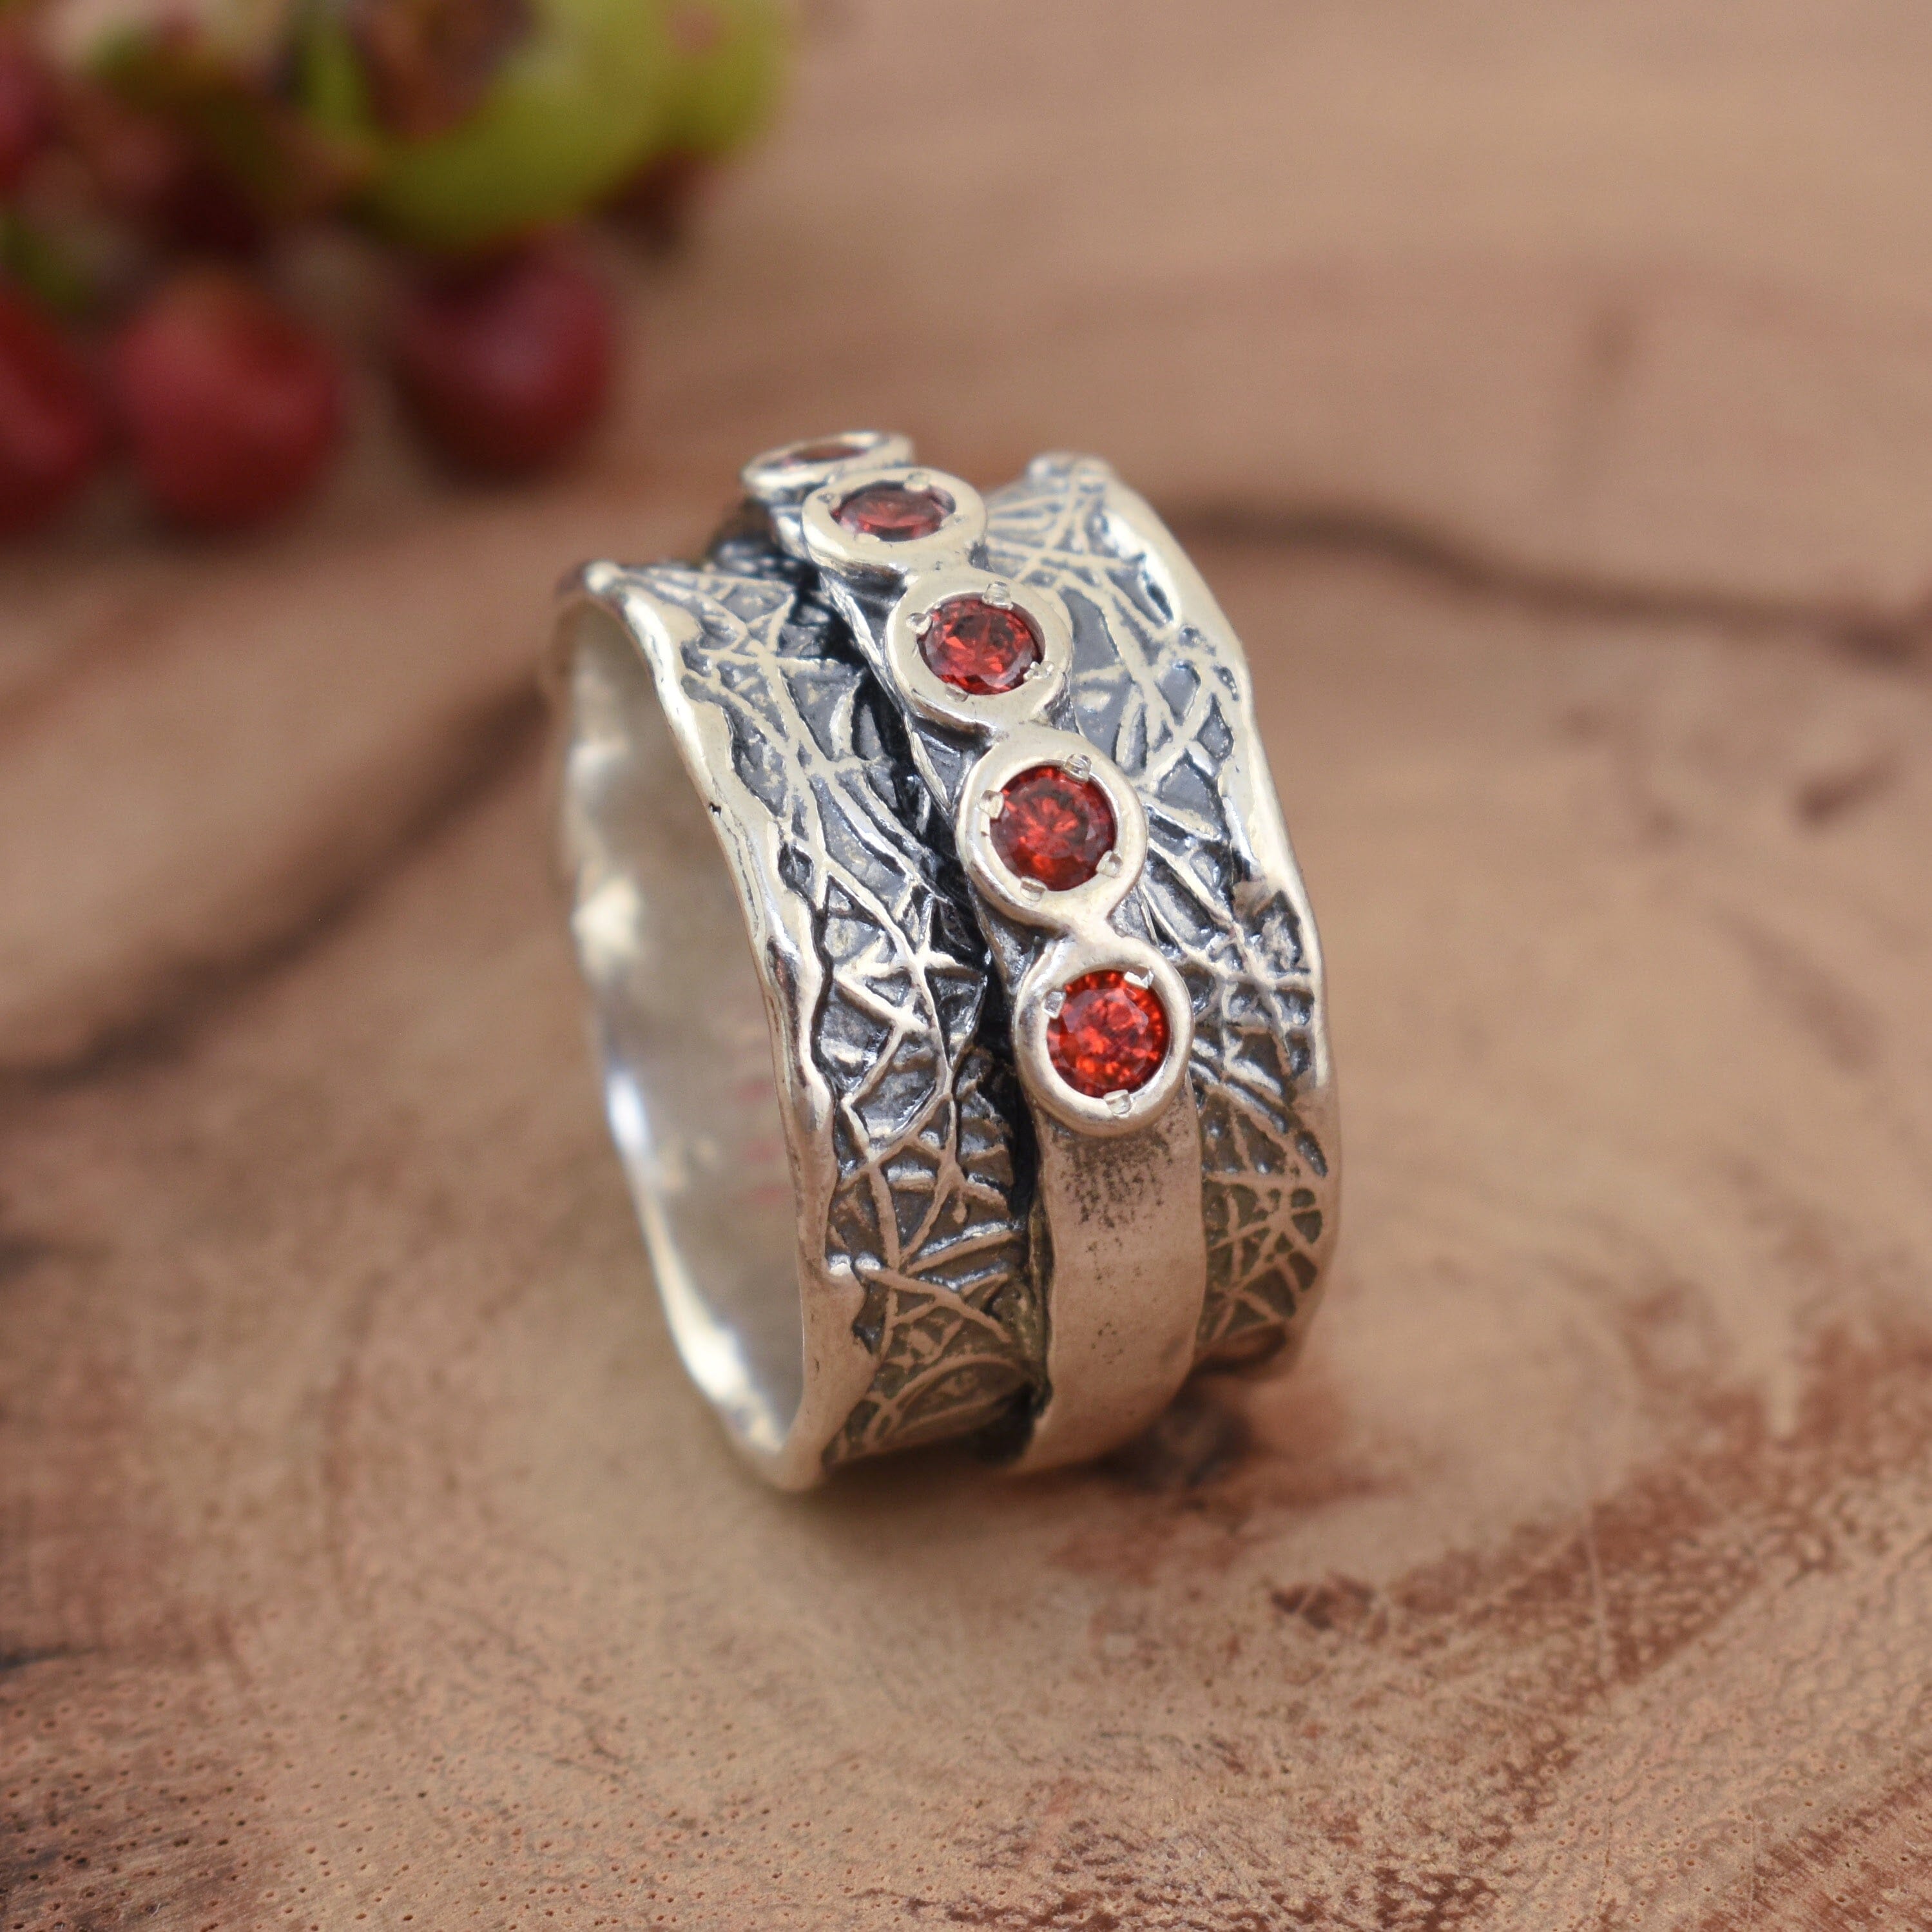 Sterling silver ring with red stone accents